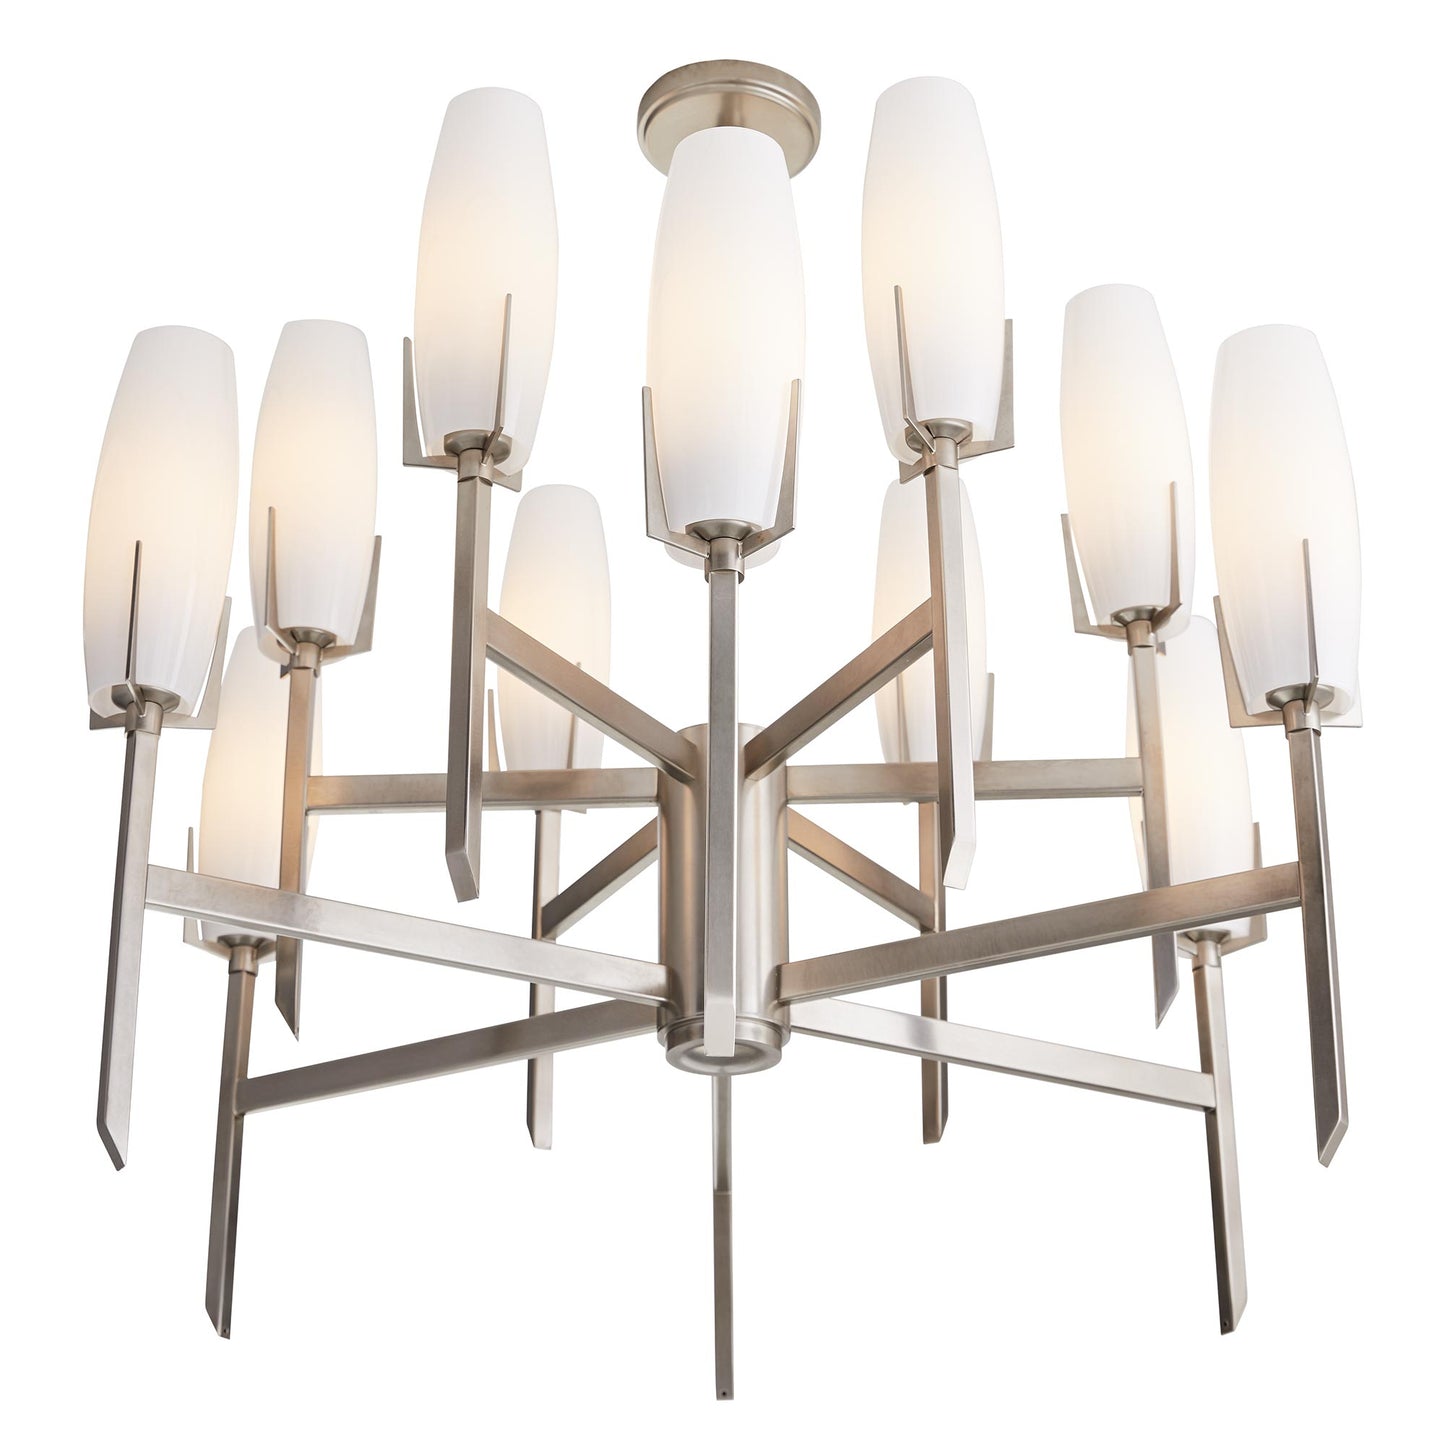 Load image into Gallery viewer, Keifer Large Chandelier
